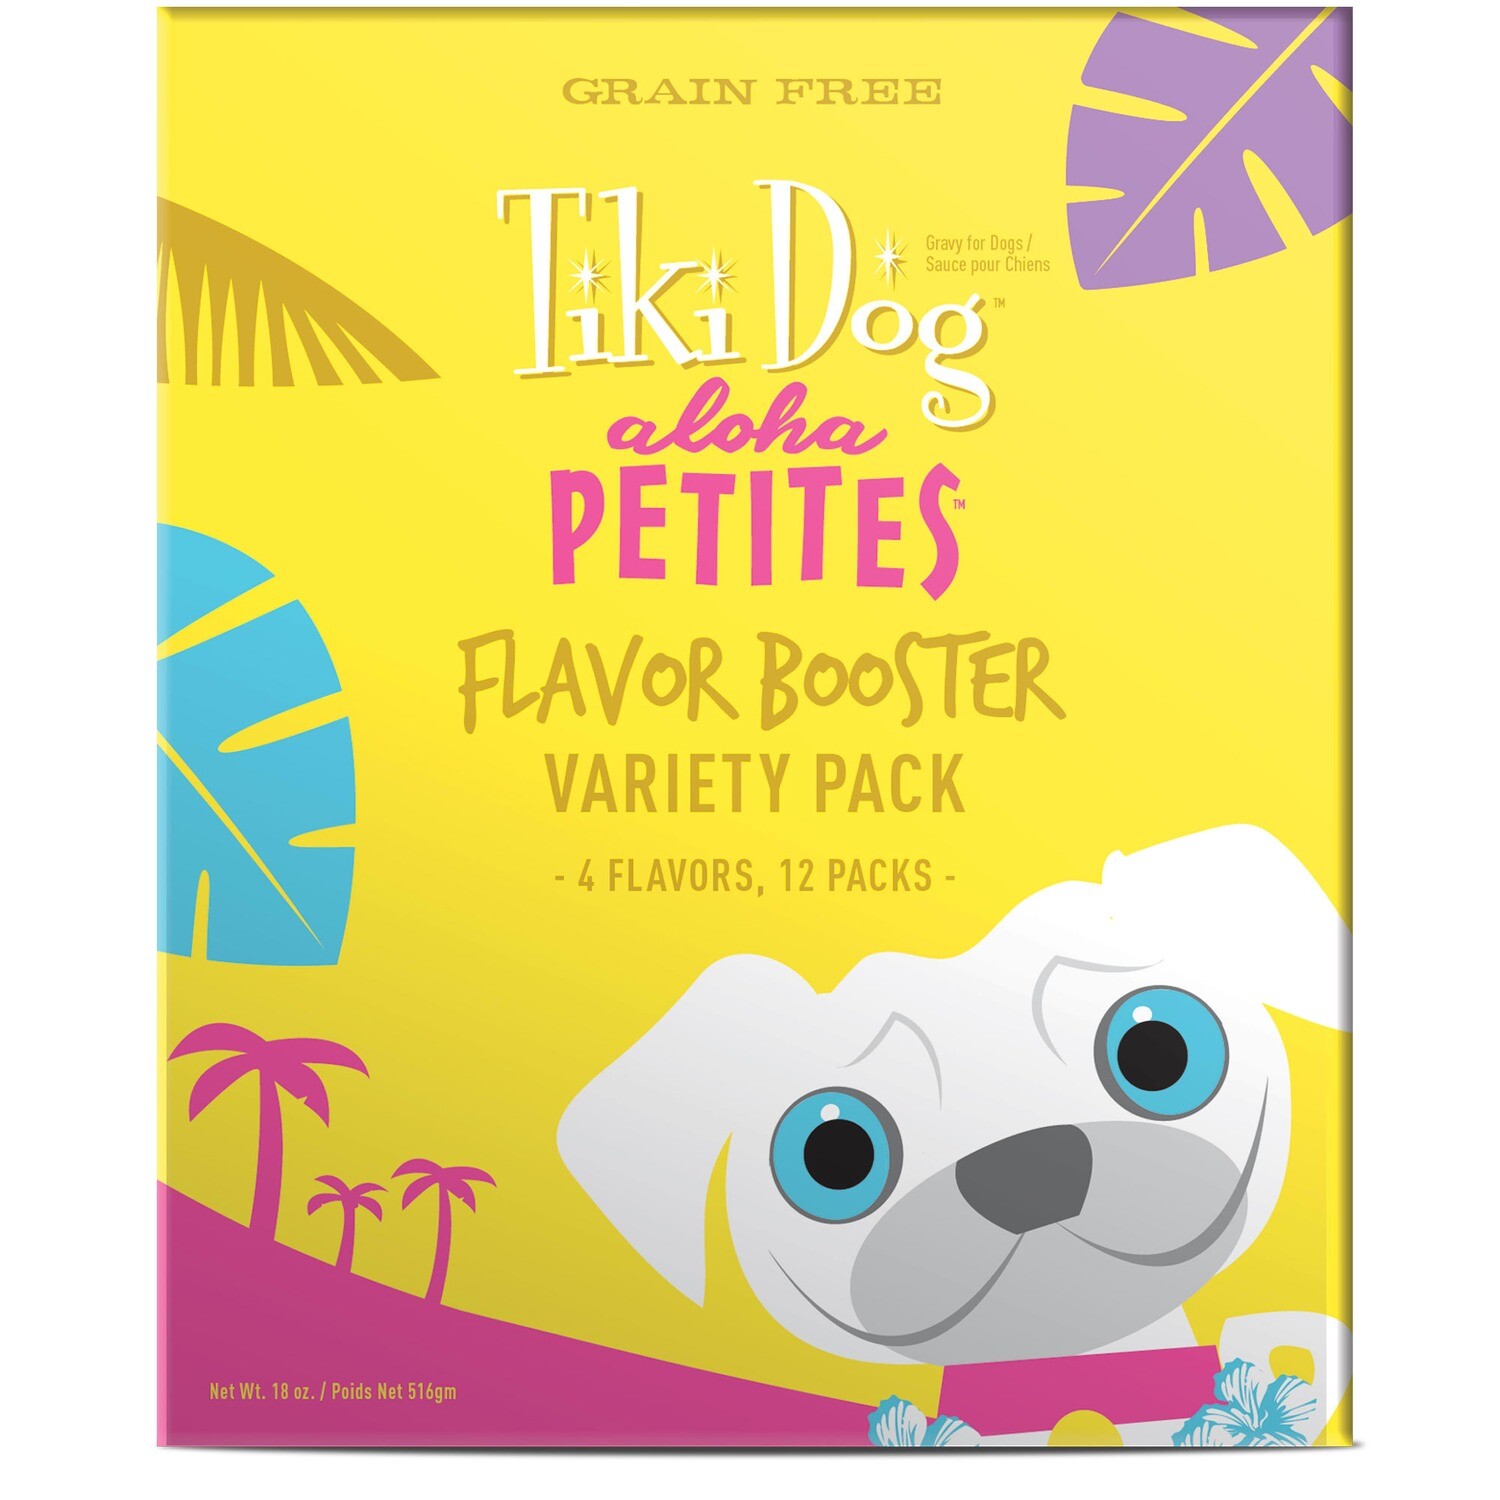 Tiki Dog Aloha Petites Grain-Free Flavor Booster Variety Pack Wet Dog Food, 1.5-oz pouch, case of 12